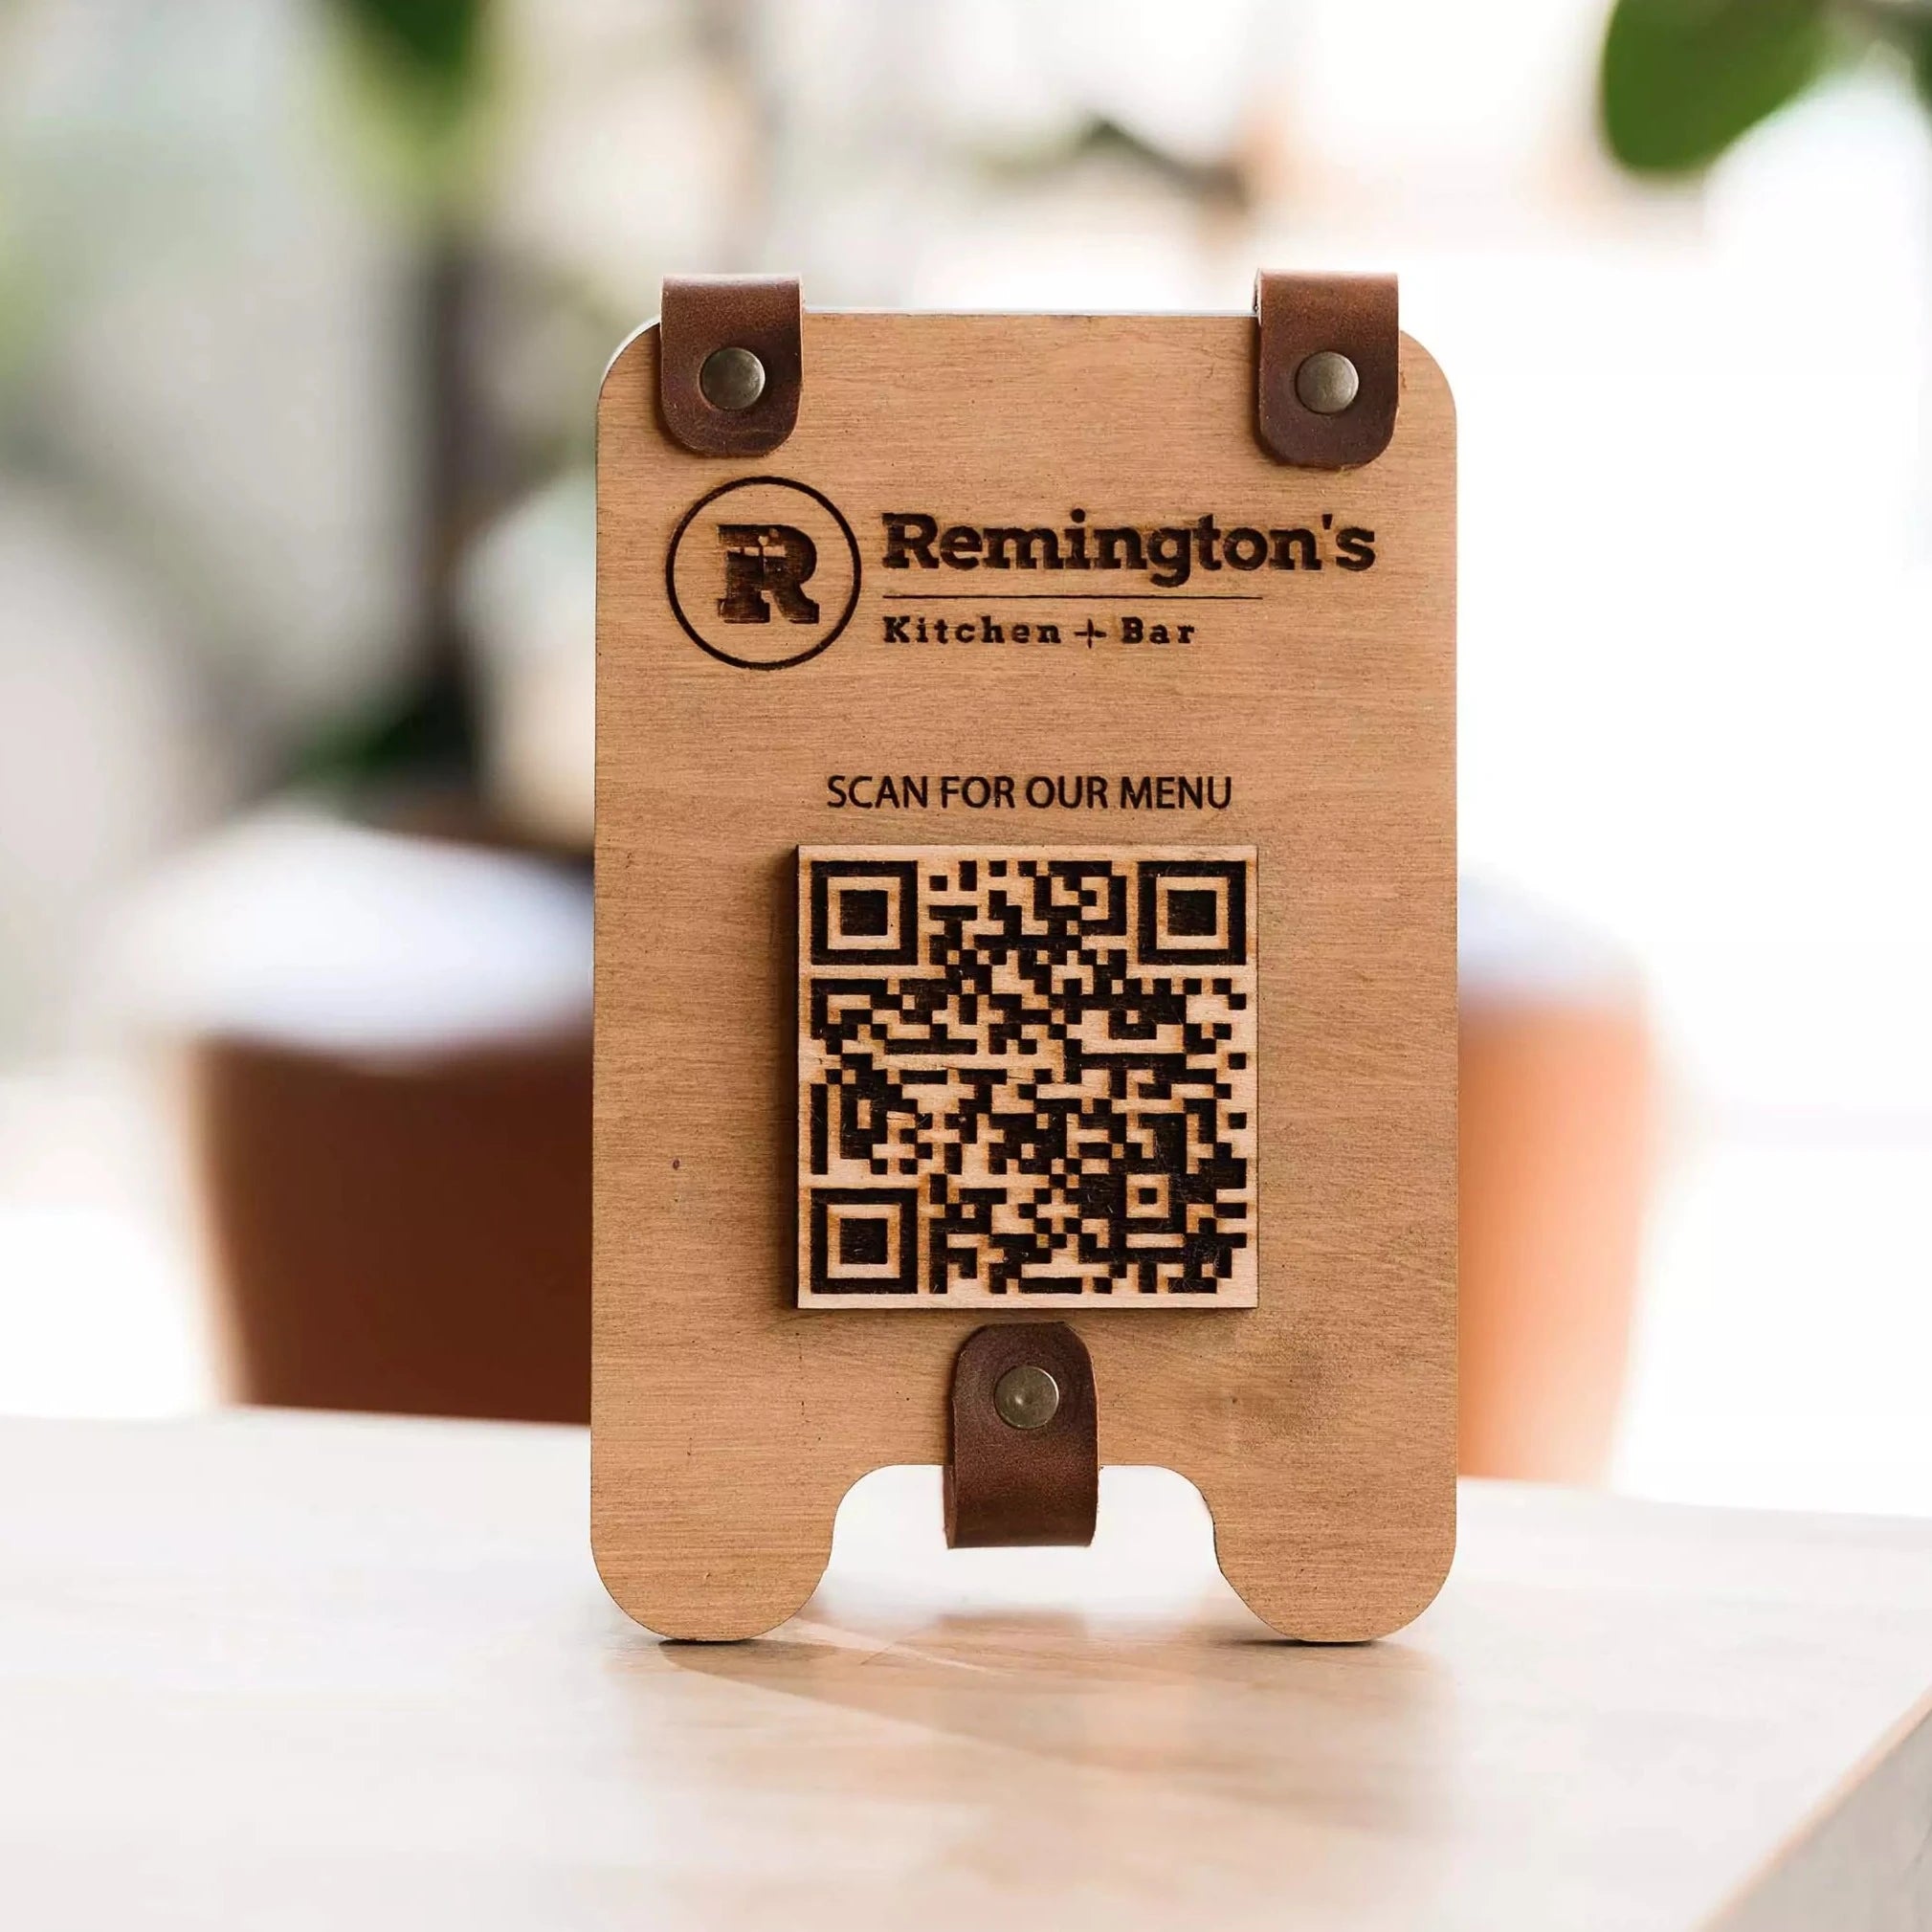 Modern Menu QR Code Stand for cafes. Provides touchless access to digital menus and payment options, enhancing customer experience